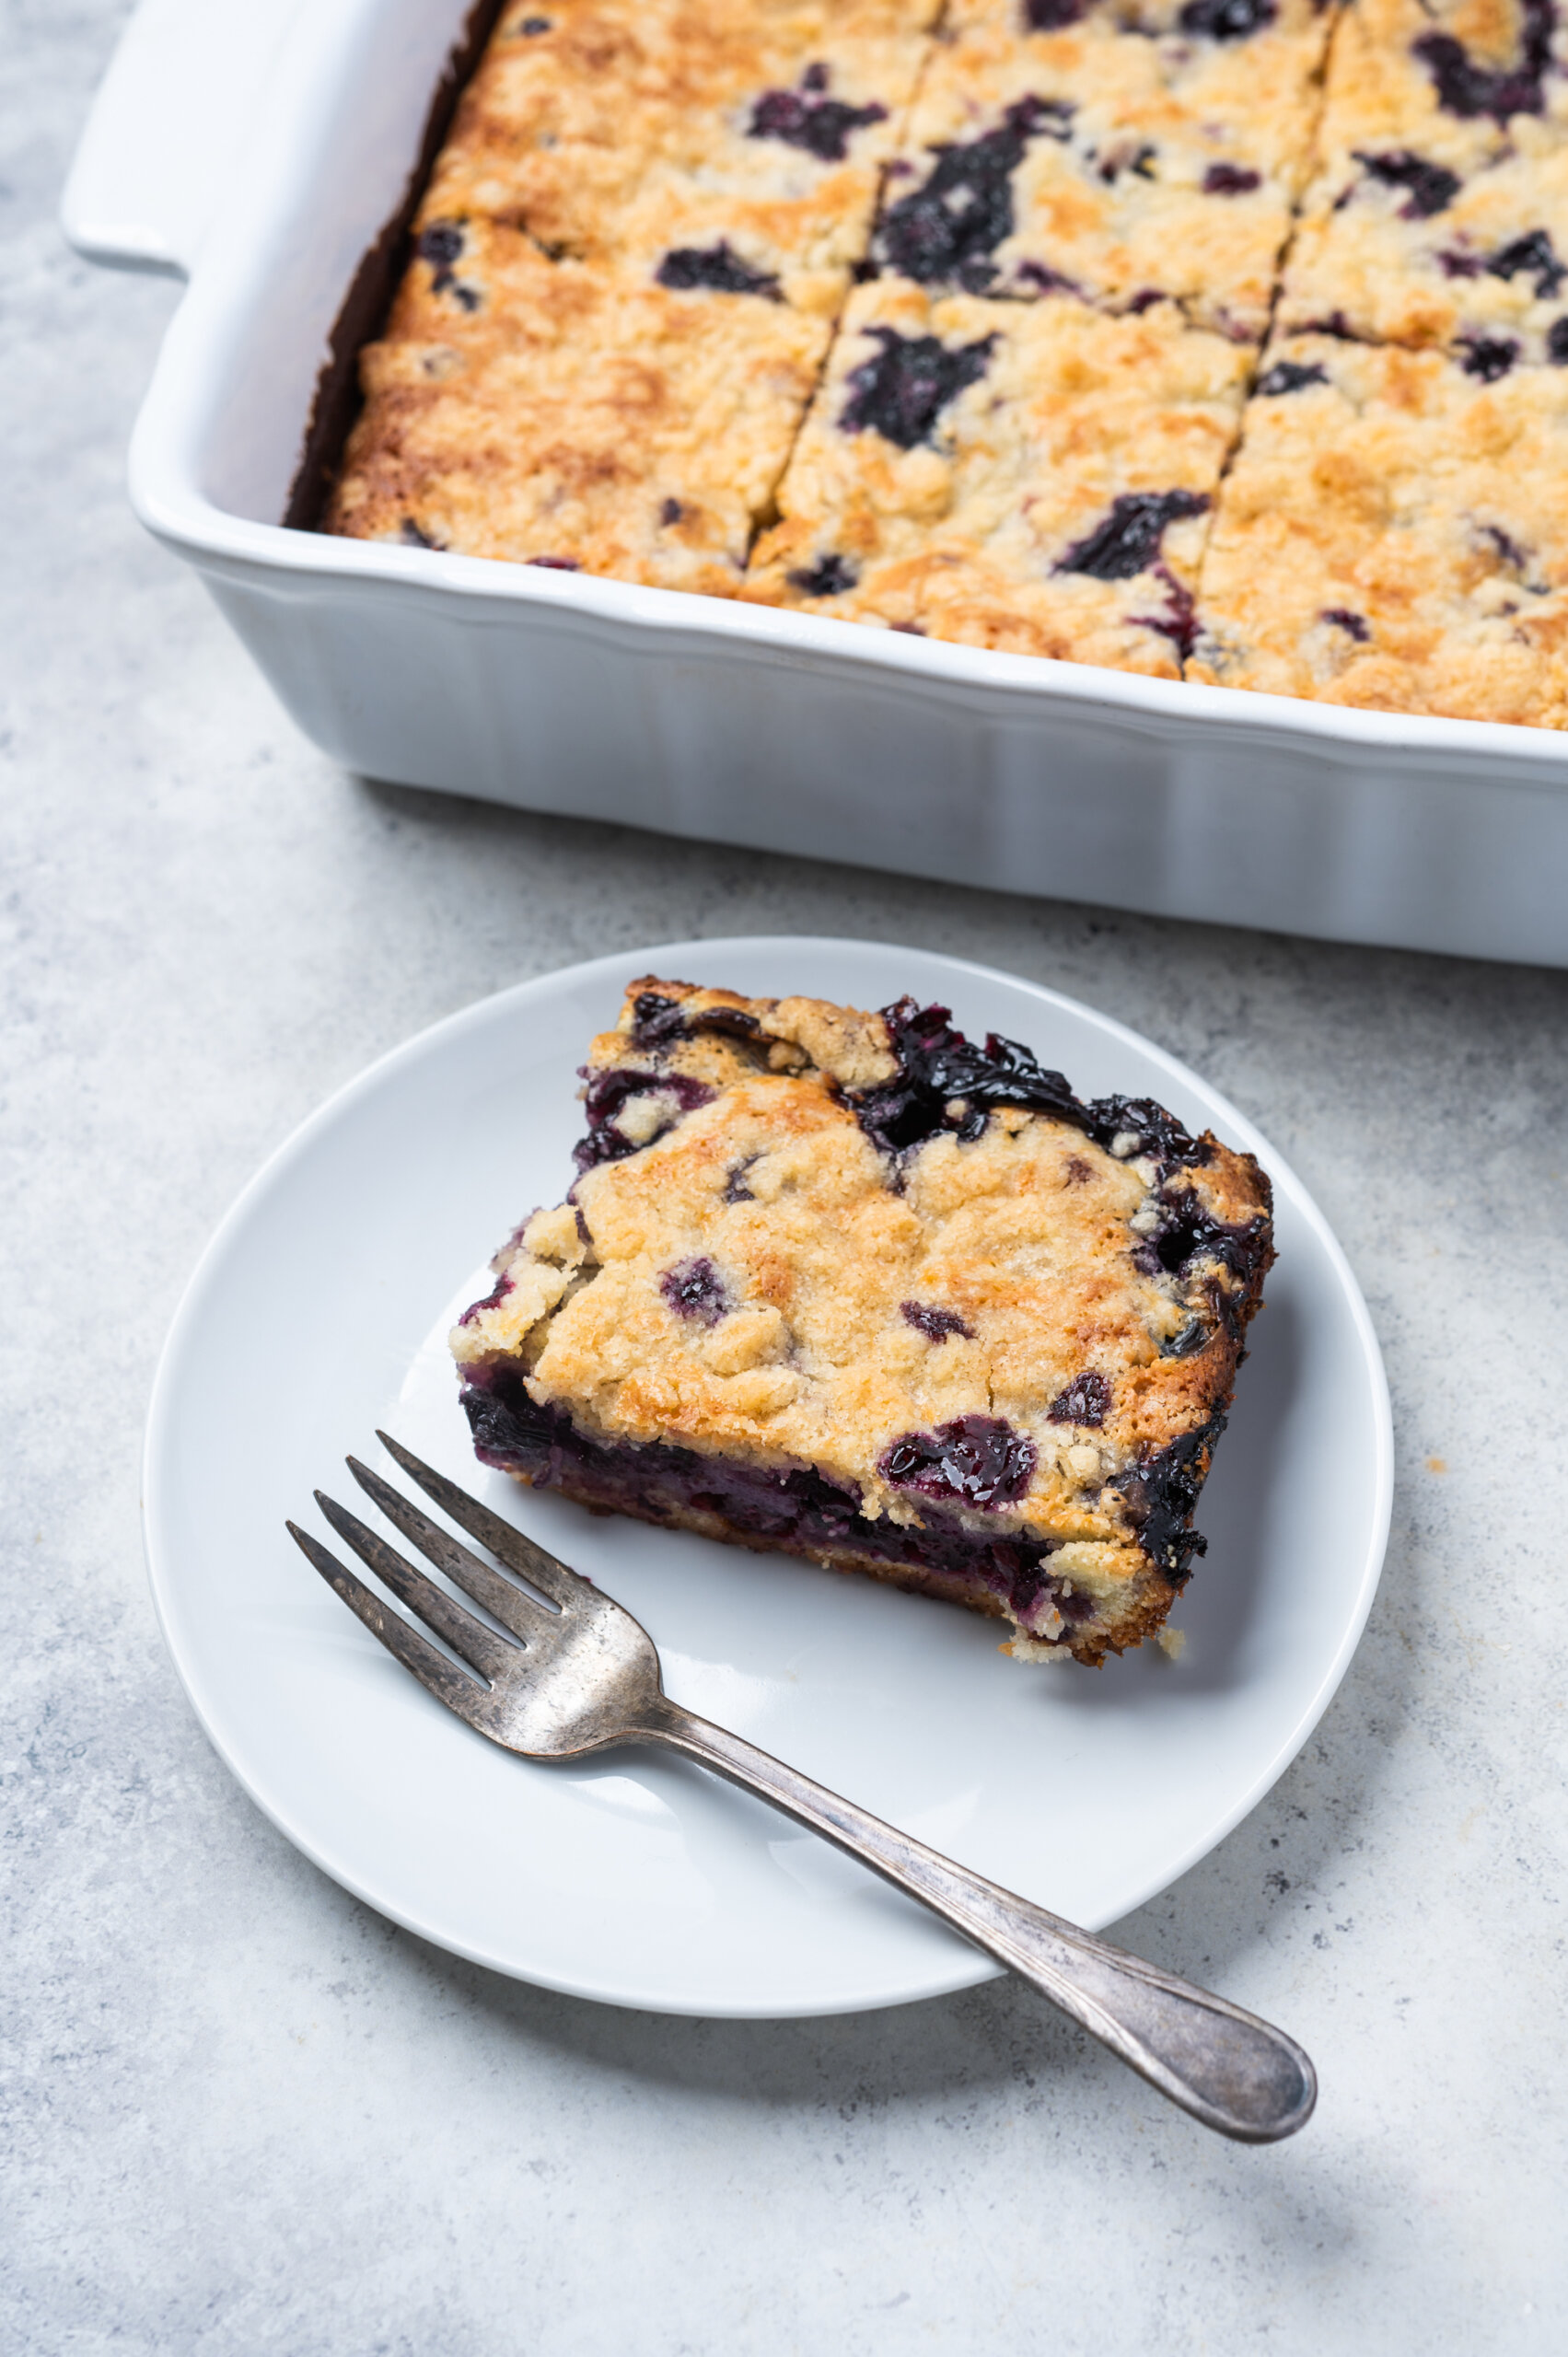 A single serving of California Grown's fresh blueberry pie bars